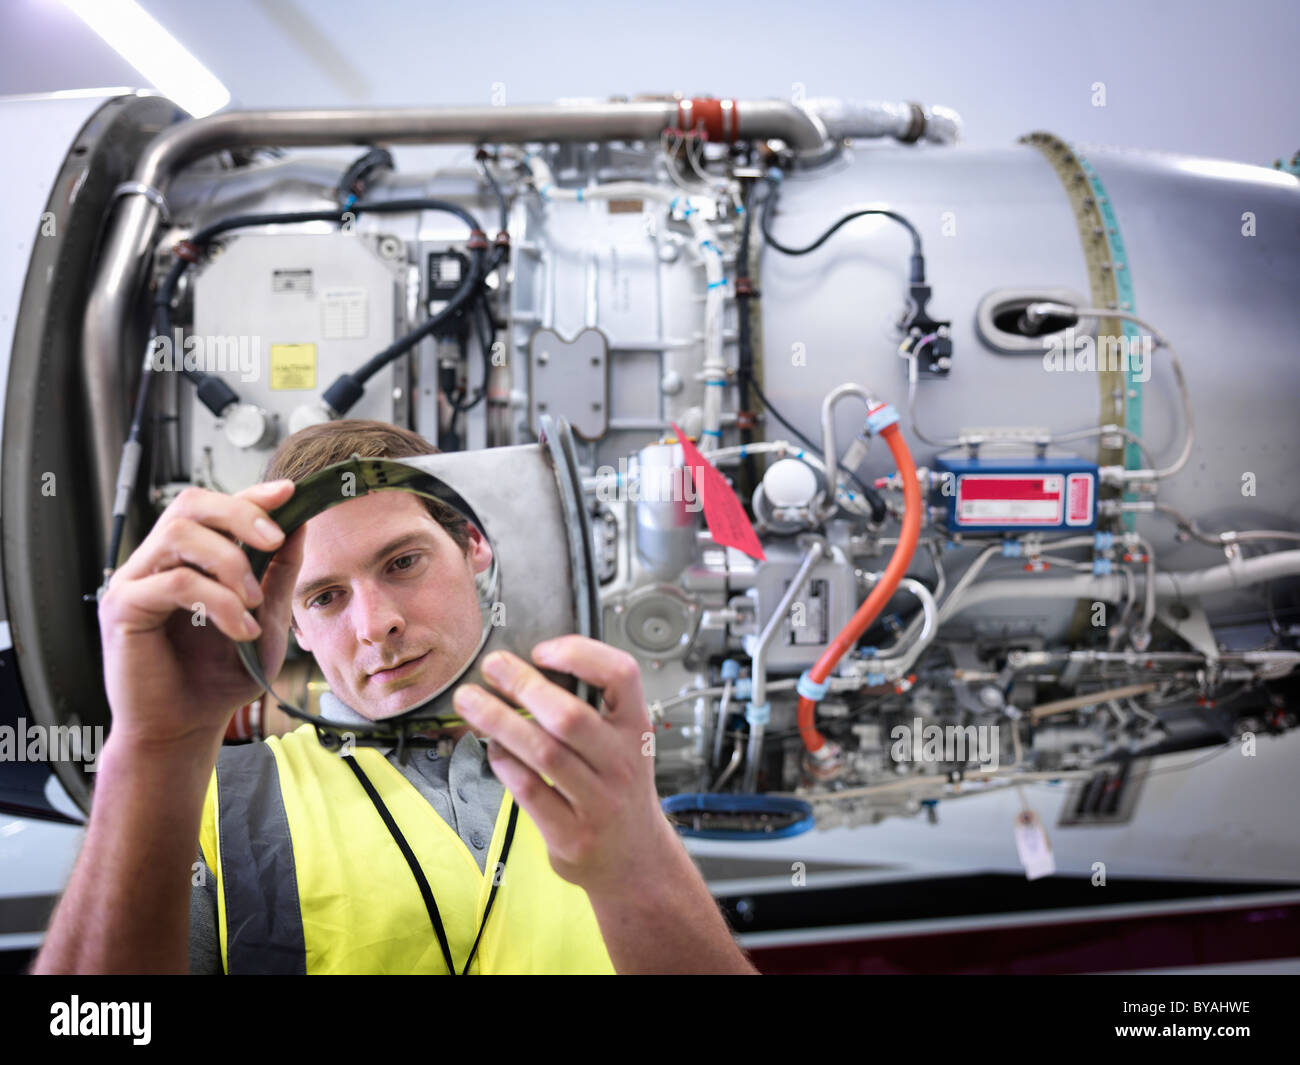 Engineer inspecting part of jet engine Stock Photo